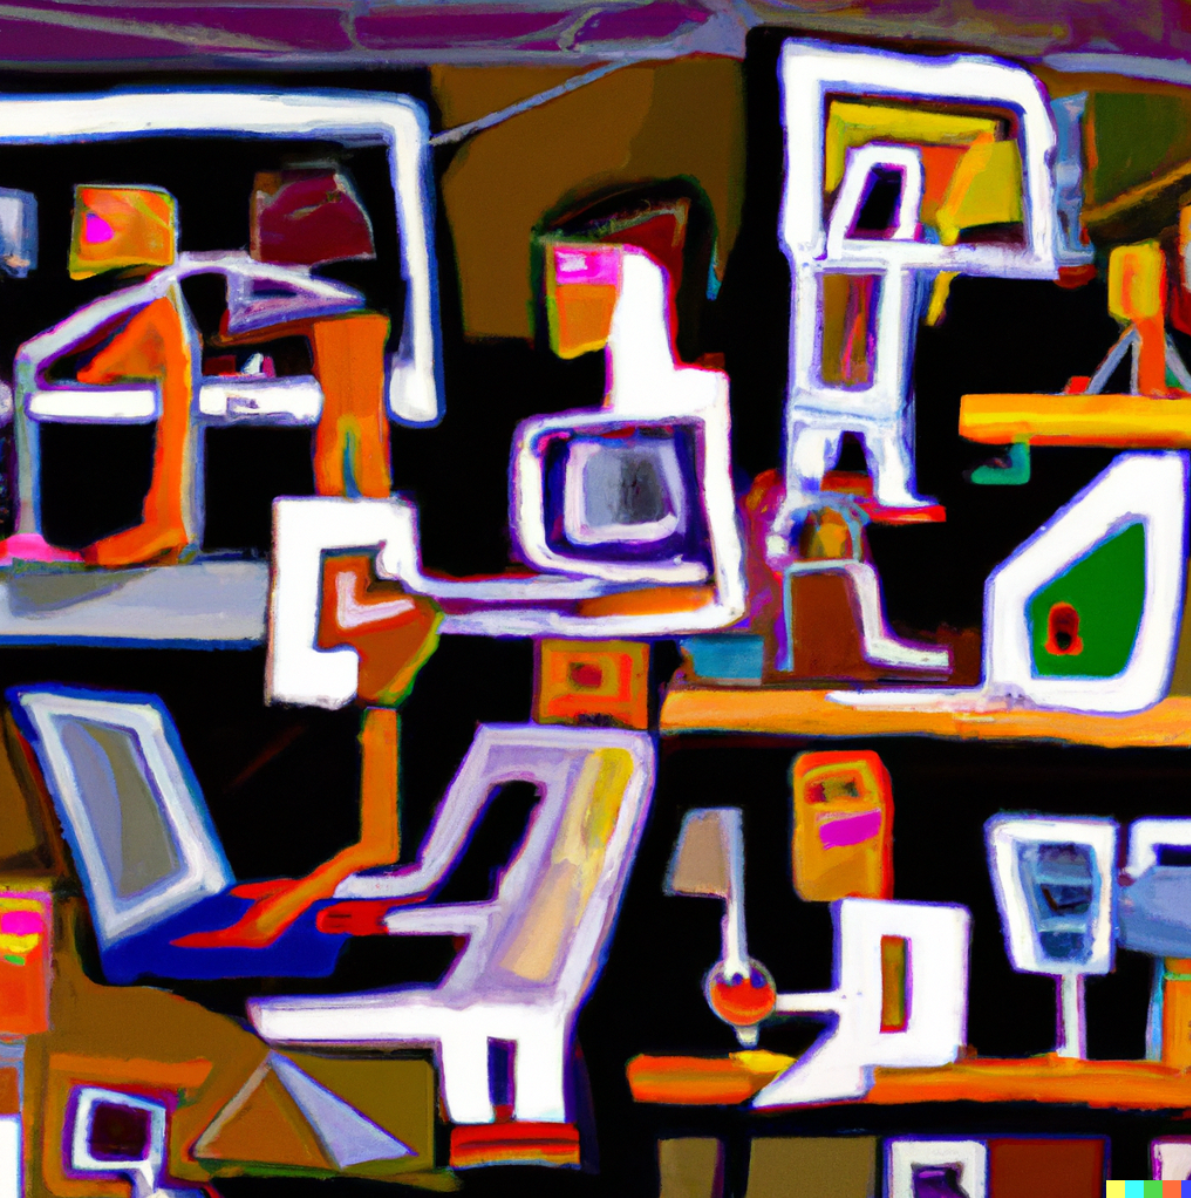 Image credit: DALL-E AI image generator with the prompt “a painting of teaching with a computer and classroom of students in the style of Picasso”.  